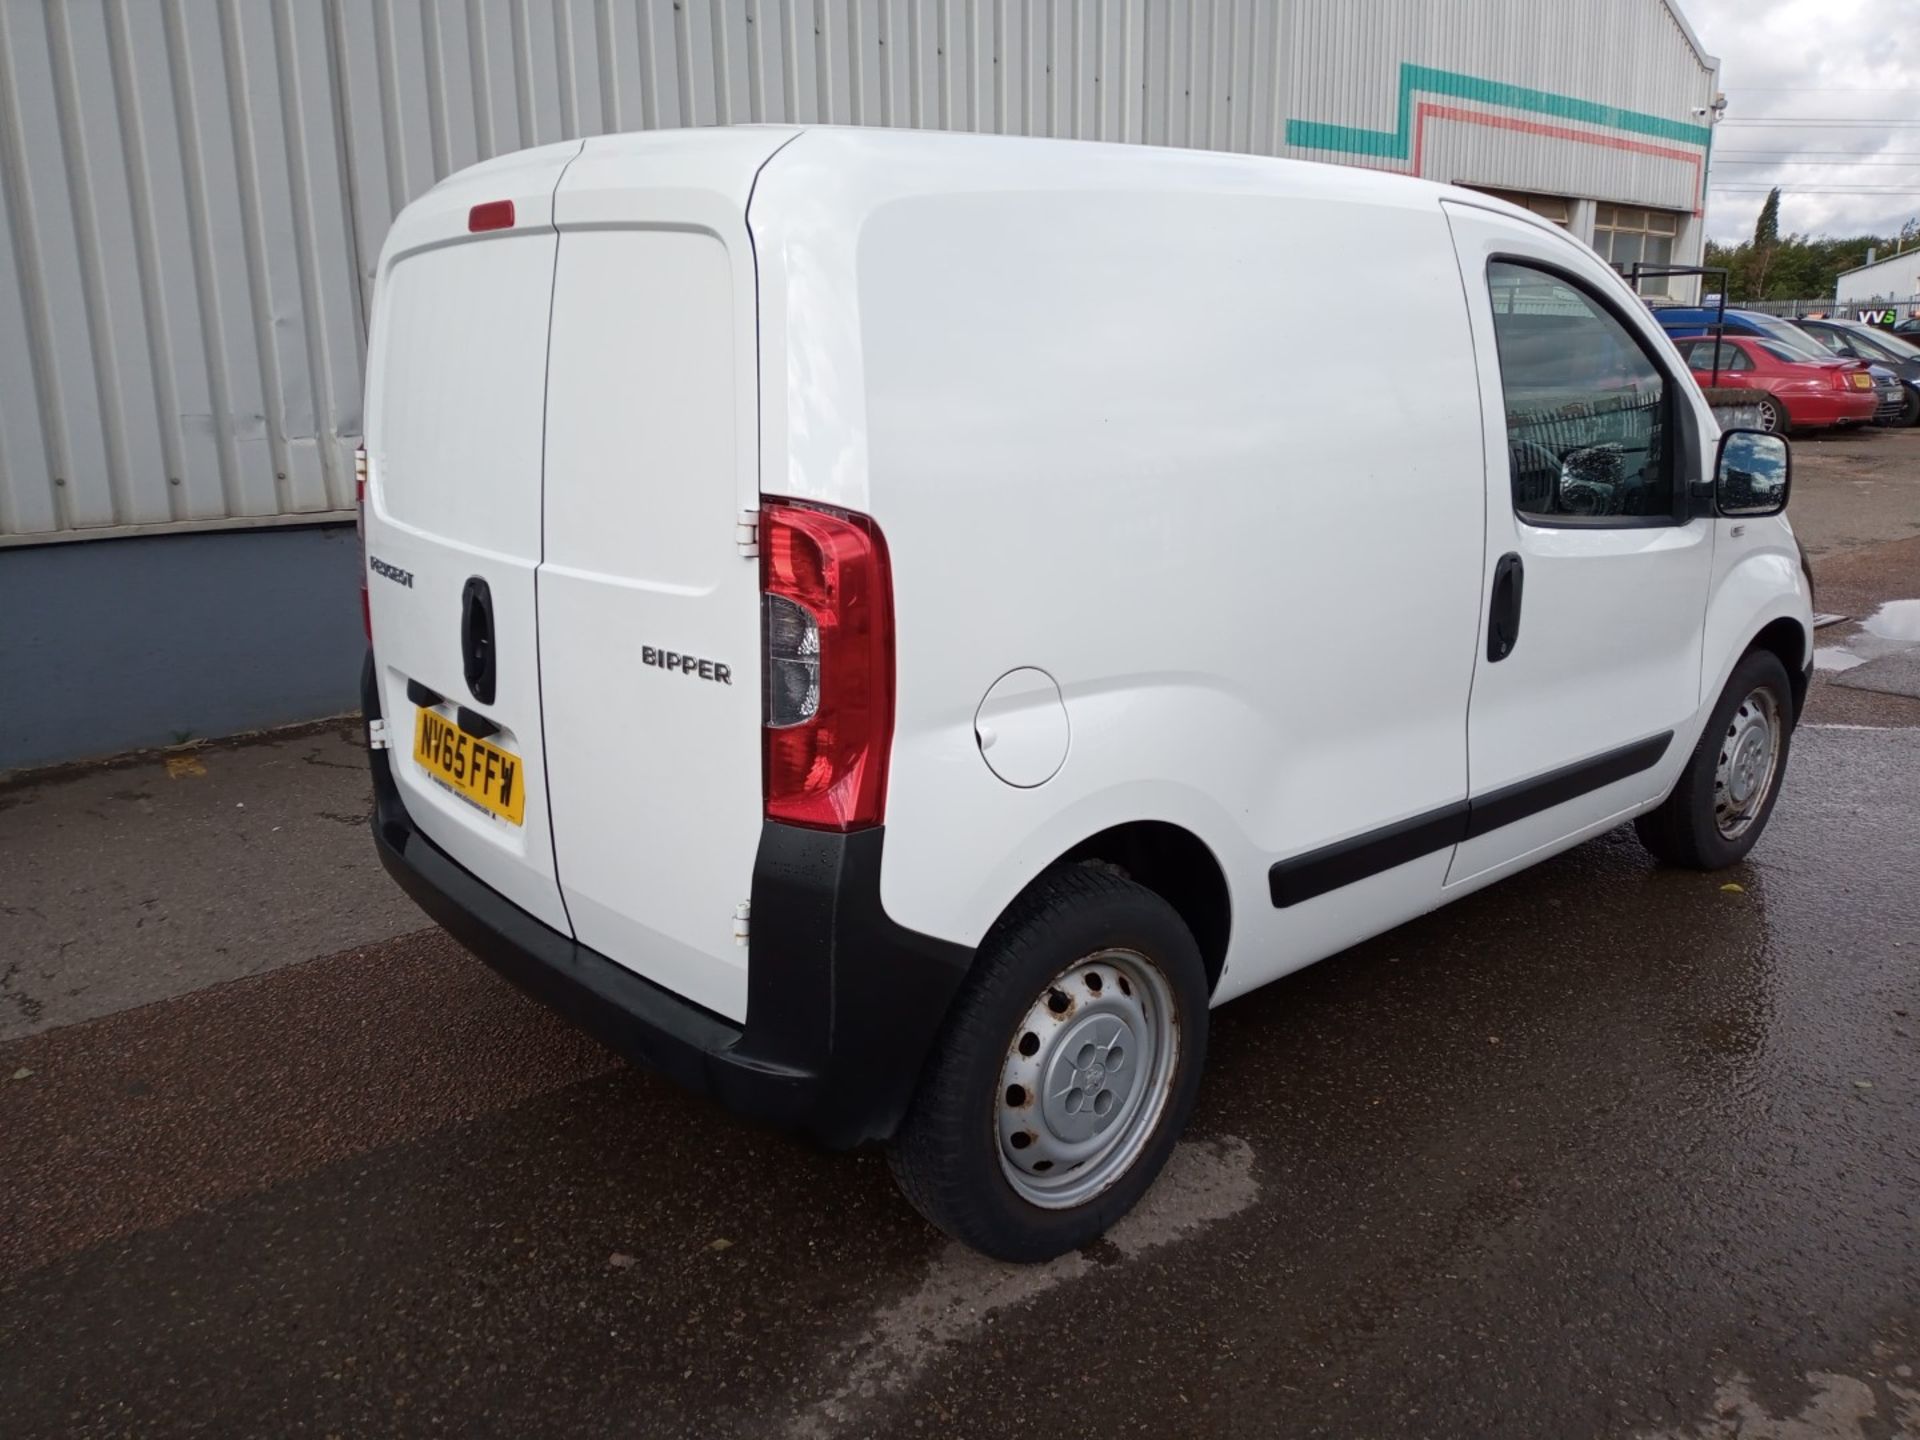 2015 Peugeot Bipper S Hdi White Panel - CL505 - Ref: VVS031 - Location: Corby, Northamptonshire - Image 7 of 25